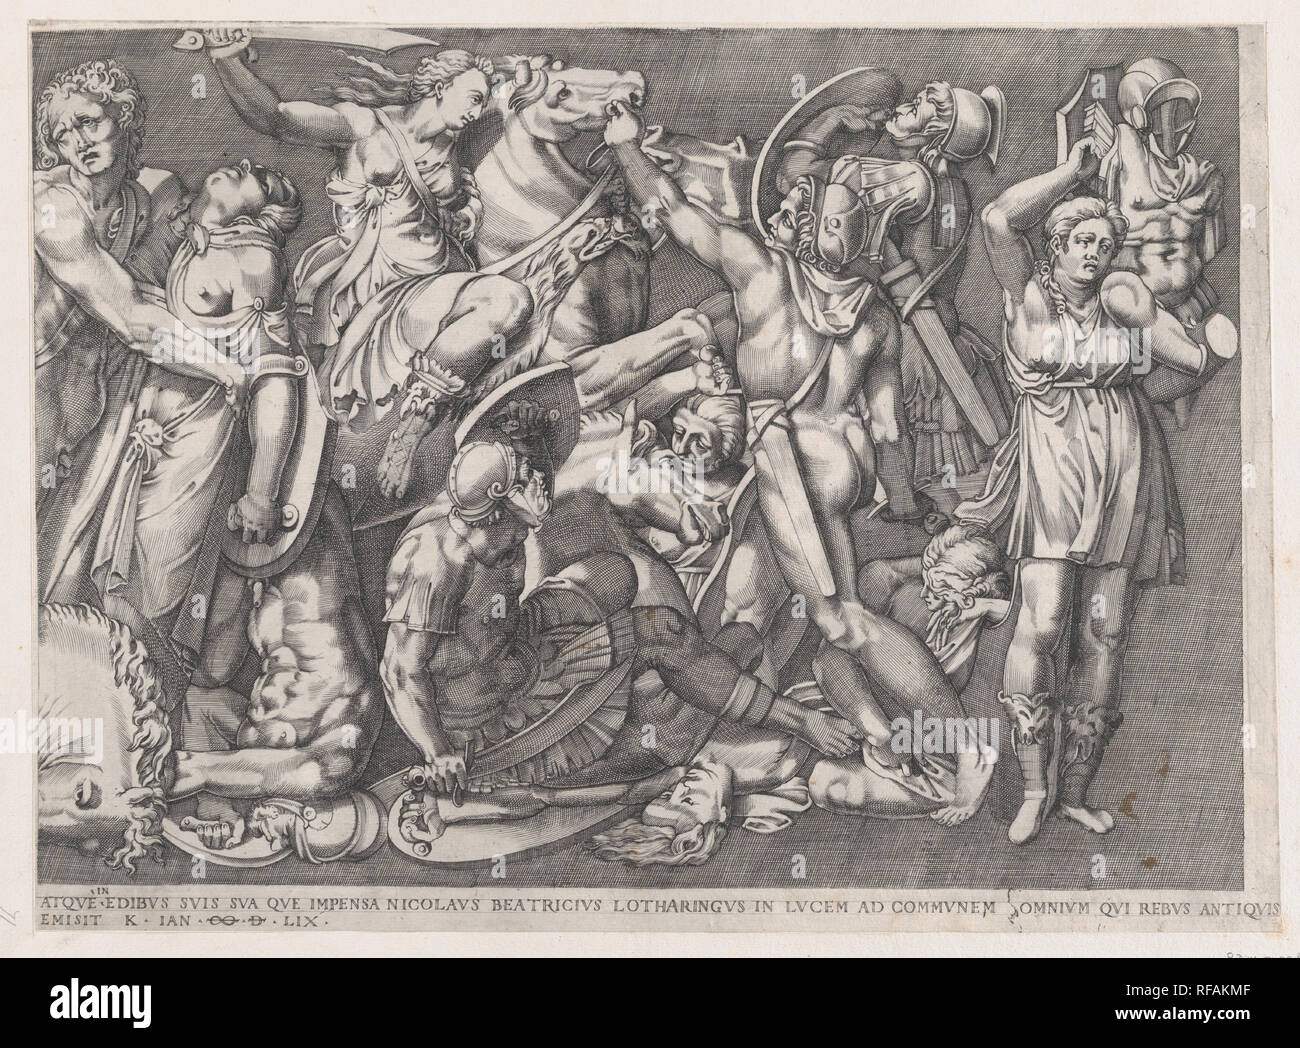 Speculum Romanae Magnificentiae: Battle of the Amazons. Artist: Nicolas Beatrizet (French, Lunéville 1515-ca. 1566 Rome (?)). Dimensions: sheet: 14 15/16 x 19 11/16 in. (38 x 50 cm)  plate: 12 3/16 x 16 9/16 in. (31 x 42 cm). Publisher: Nicolas Beatrizet (French, Lunéville 1515-ca. 1566 Rome (?)). Series/Portfolio: Speculum Romanae Magnificentiae. Date: 1559.  This print comes from the museum's copy of the Speculum Romanae Magnificentiae (The Mirror of Roman Magnificence) The Speculum found its origin in the publishing endeavors of Antonio Salamanca and Antonio Lafreri. During their Roman publ Stock Photo